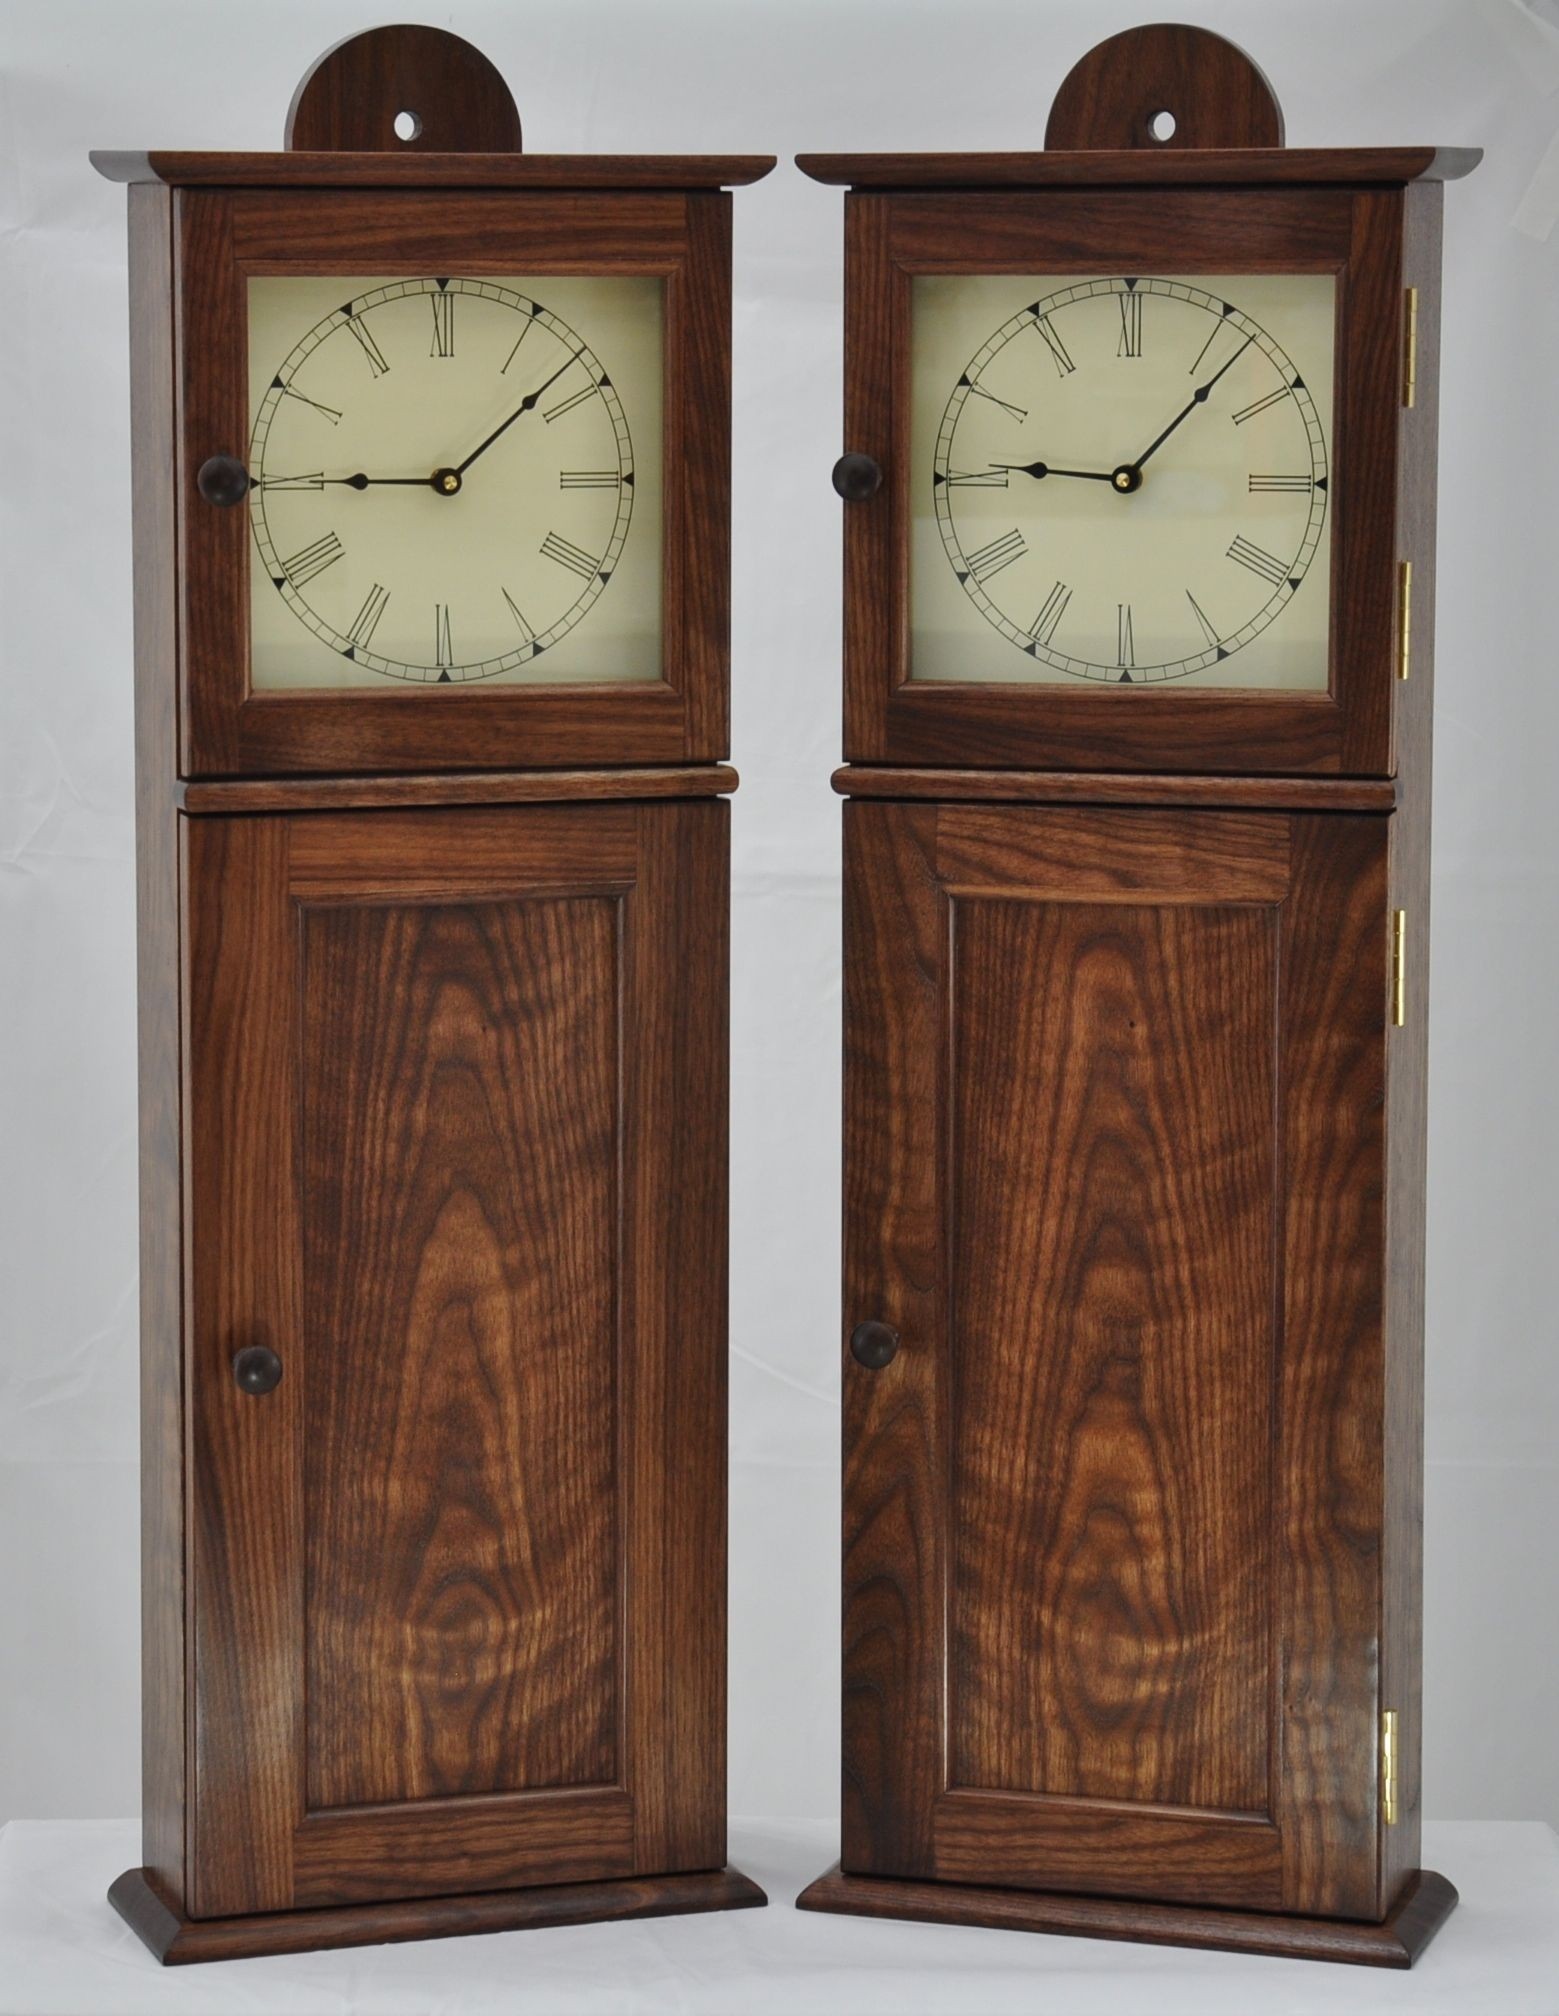 Hand crafted shaker wall clock in figured walnut by